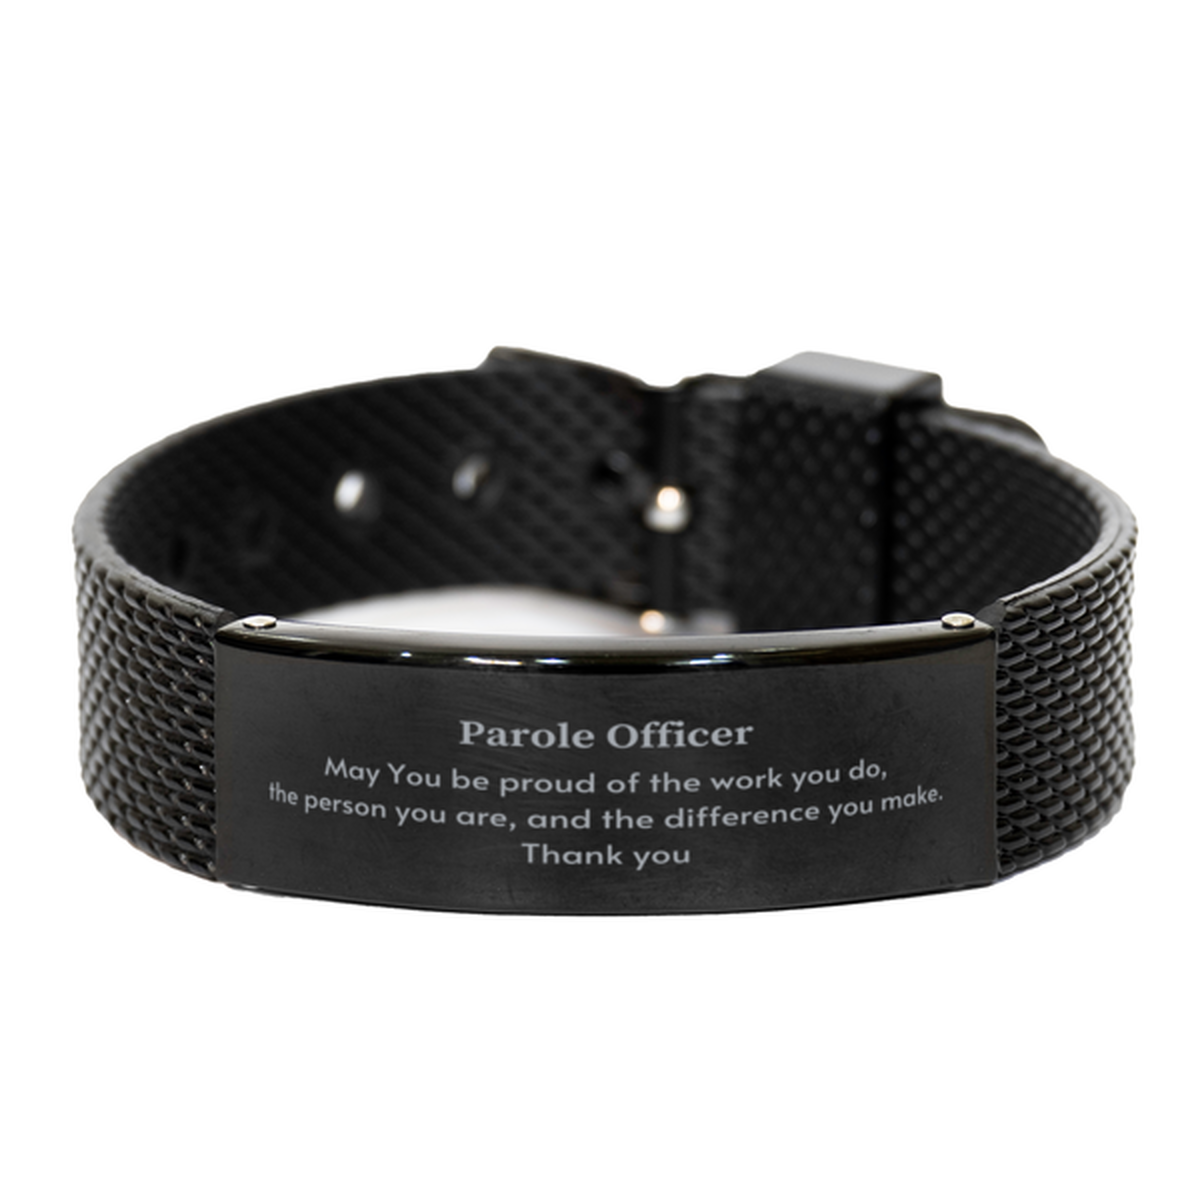 Heartwarming Black Shark Mesh Bracelet Retirement Coworkers Gifts for Parole Officer, Parole Officer May You be proud of the work you do, the person you are Gifts for Boss Men Women Friends